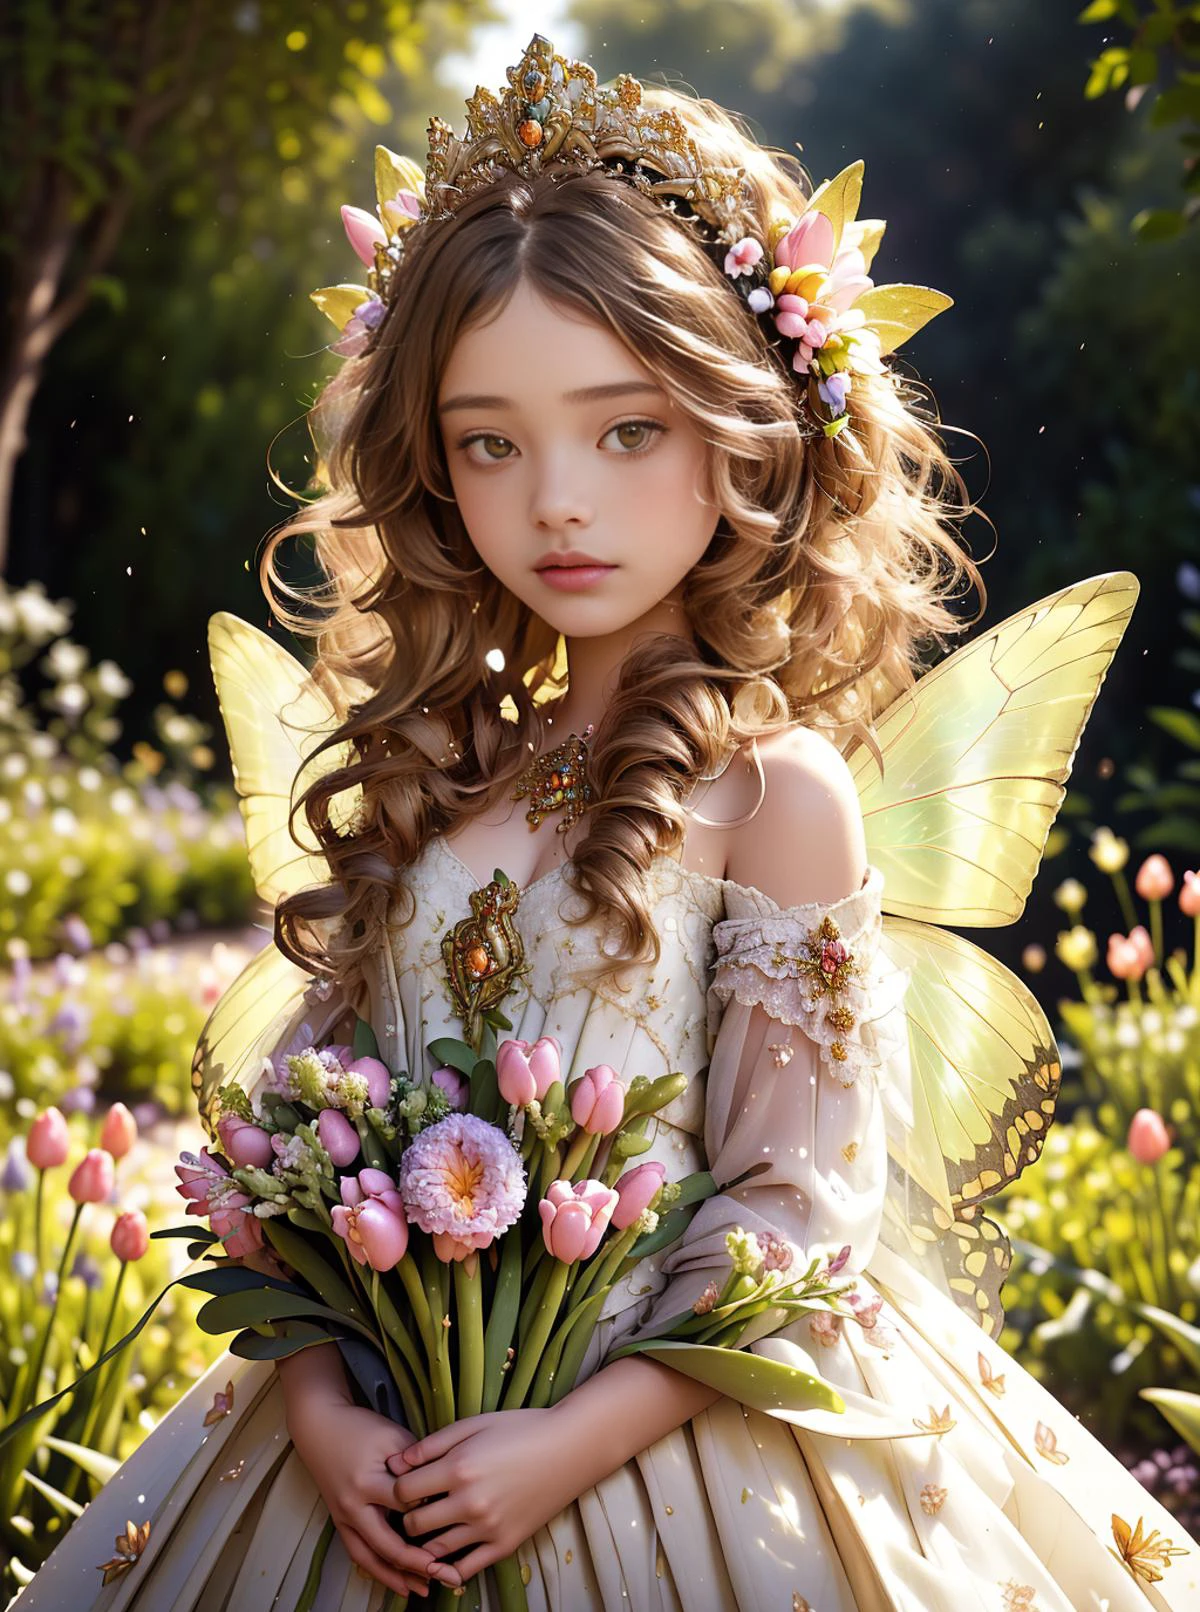 A young girl in a fairy costume holding a bouquet of flowers - SeaArt AI